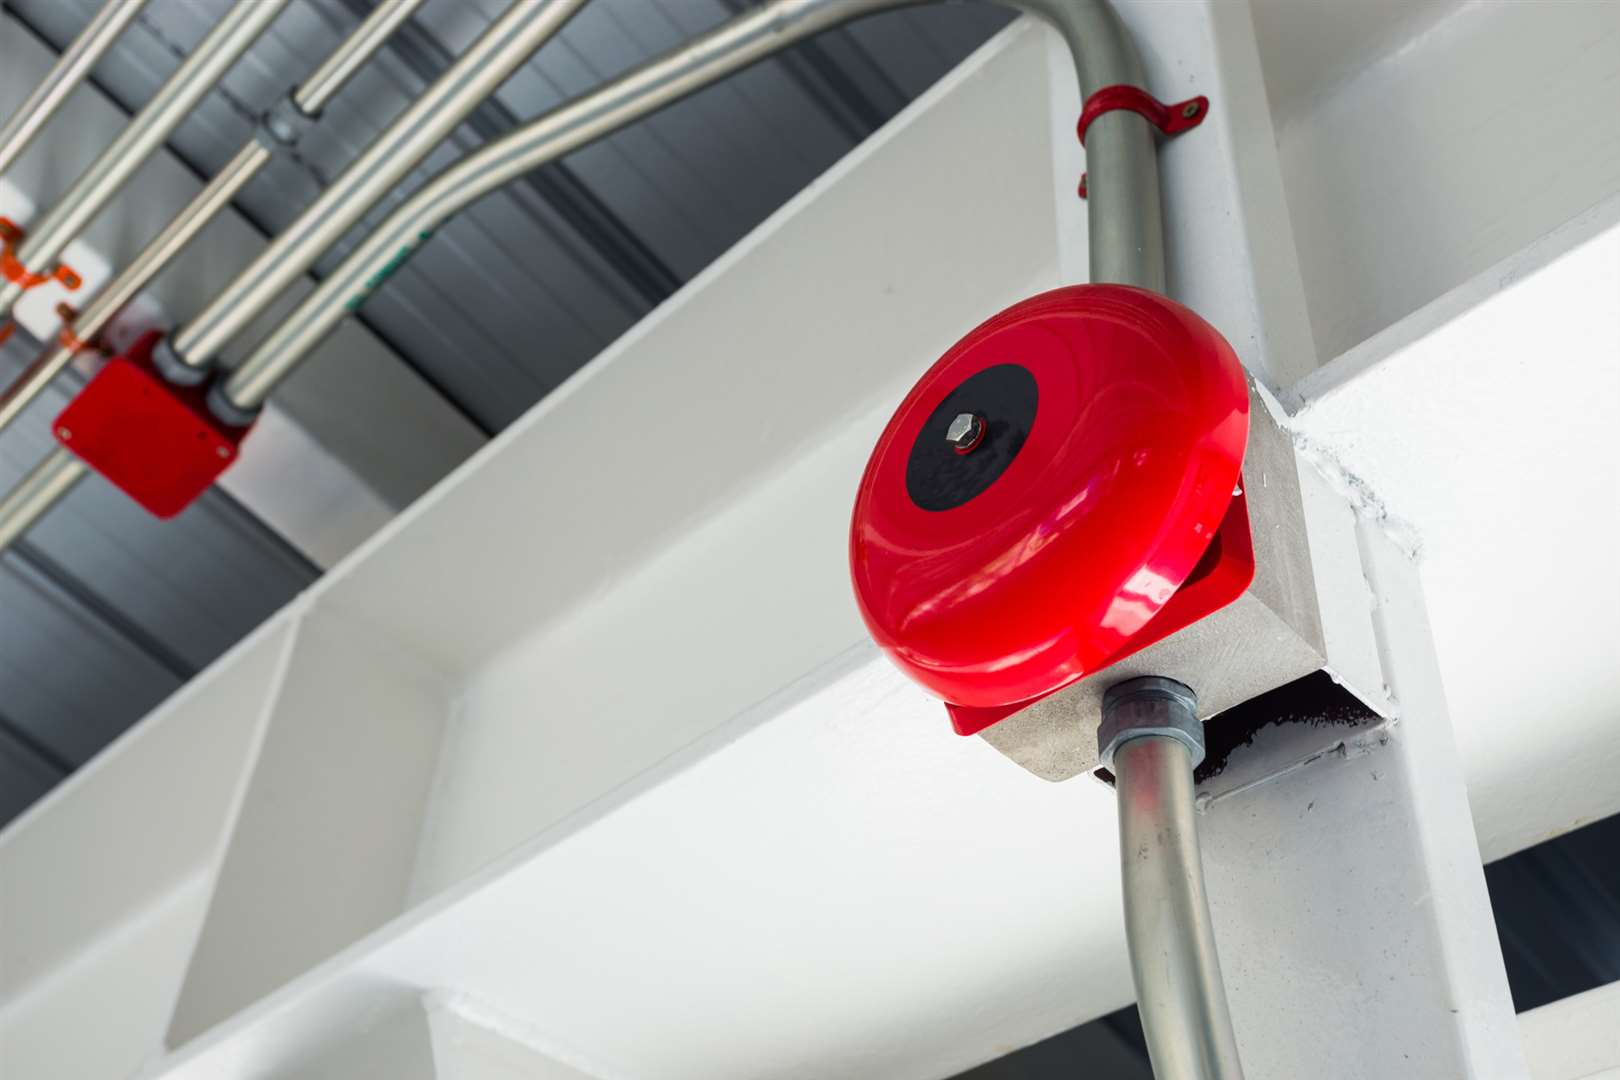 Tonbridge-based dB Audio and Electronic Services installs, services and maintains fire detection systems